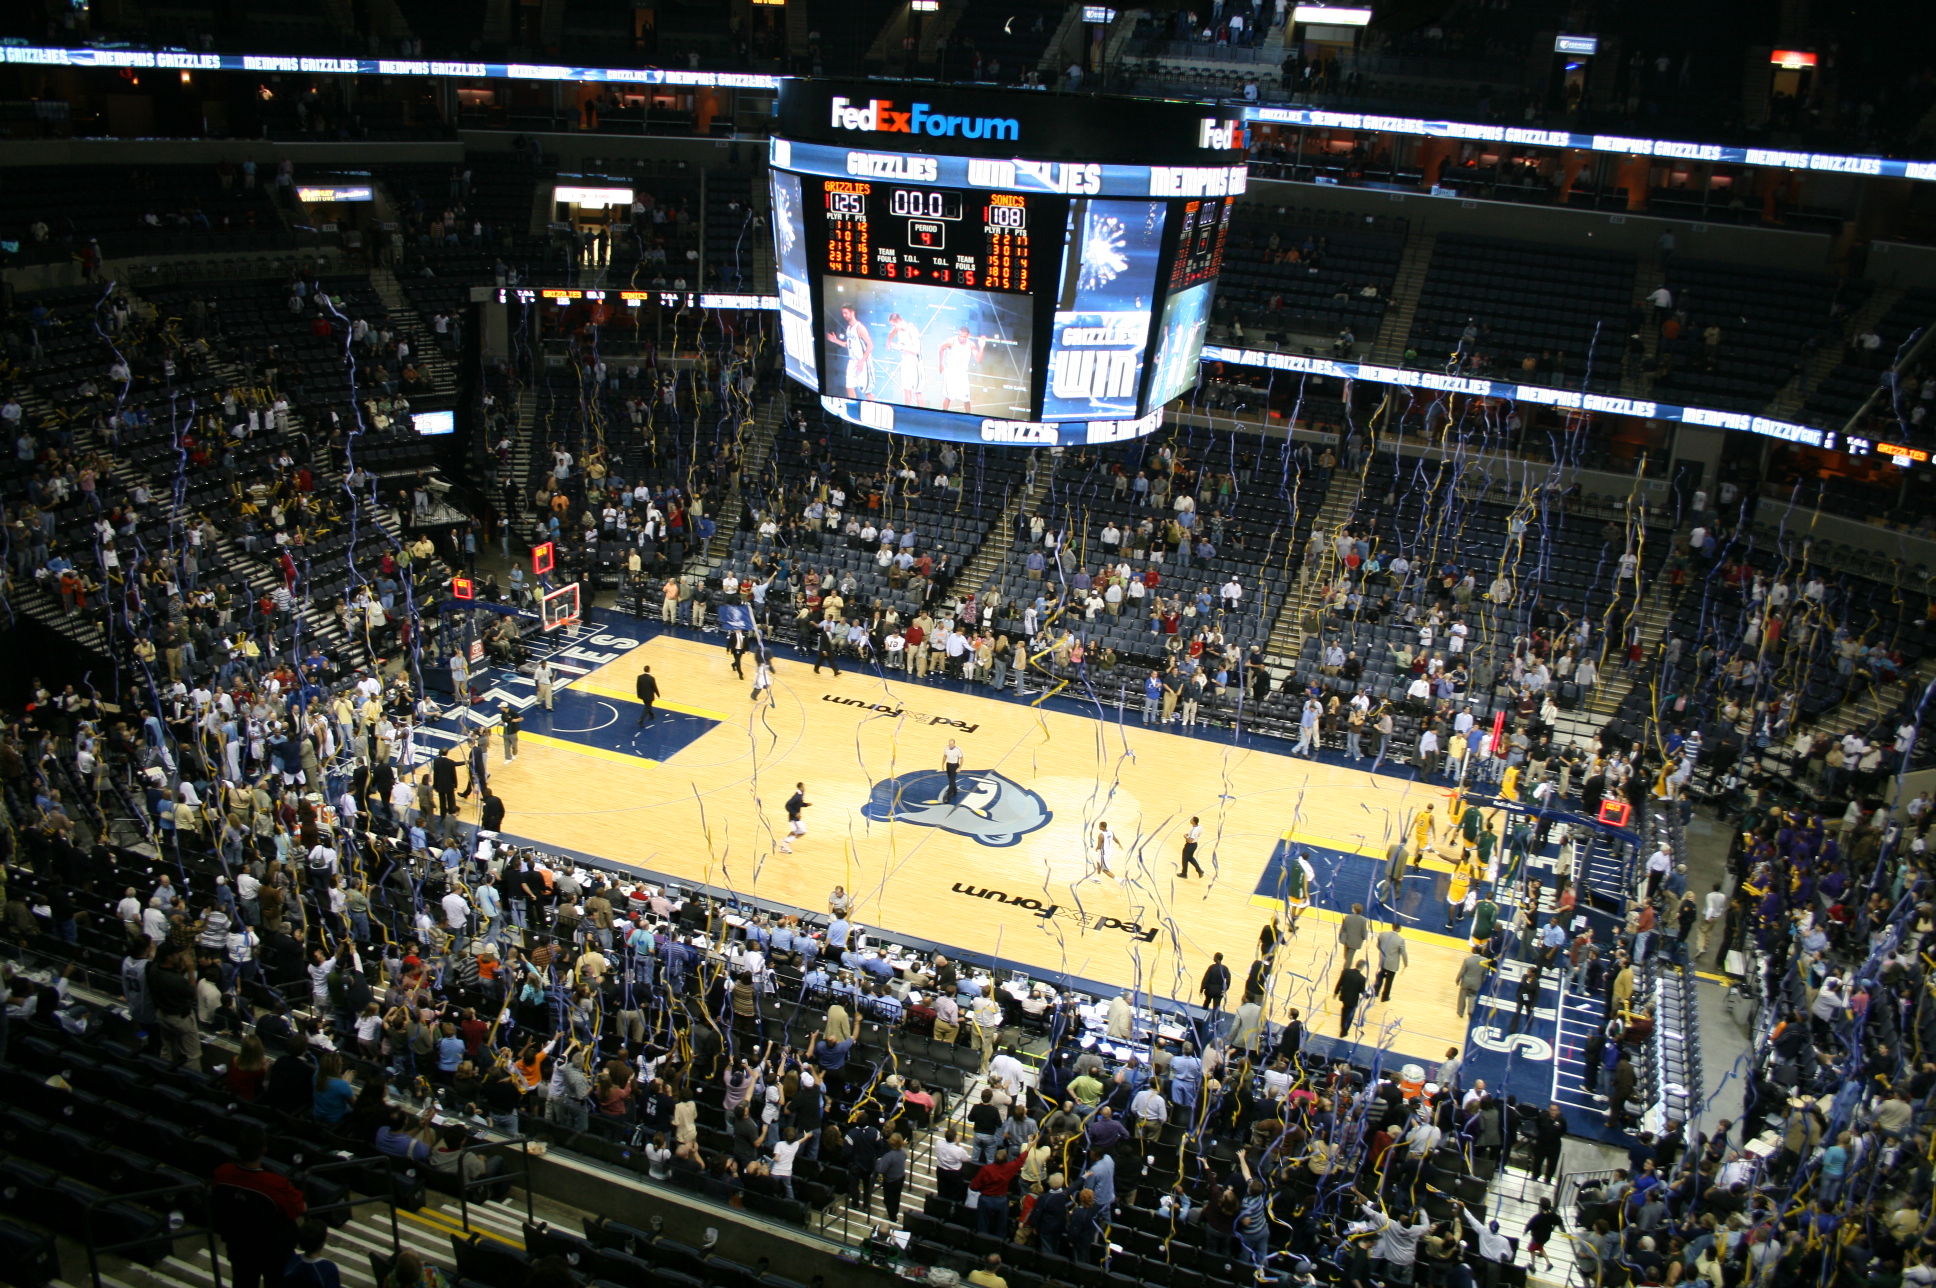 a view of a basketball court with fans in the stands